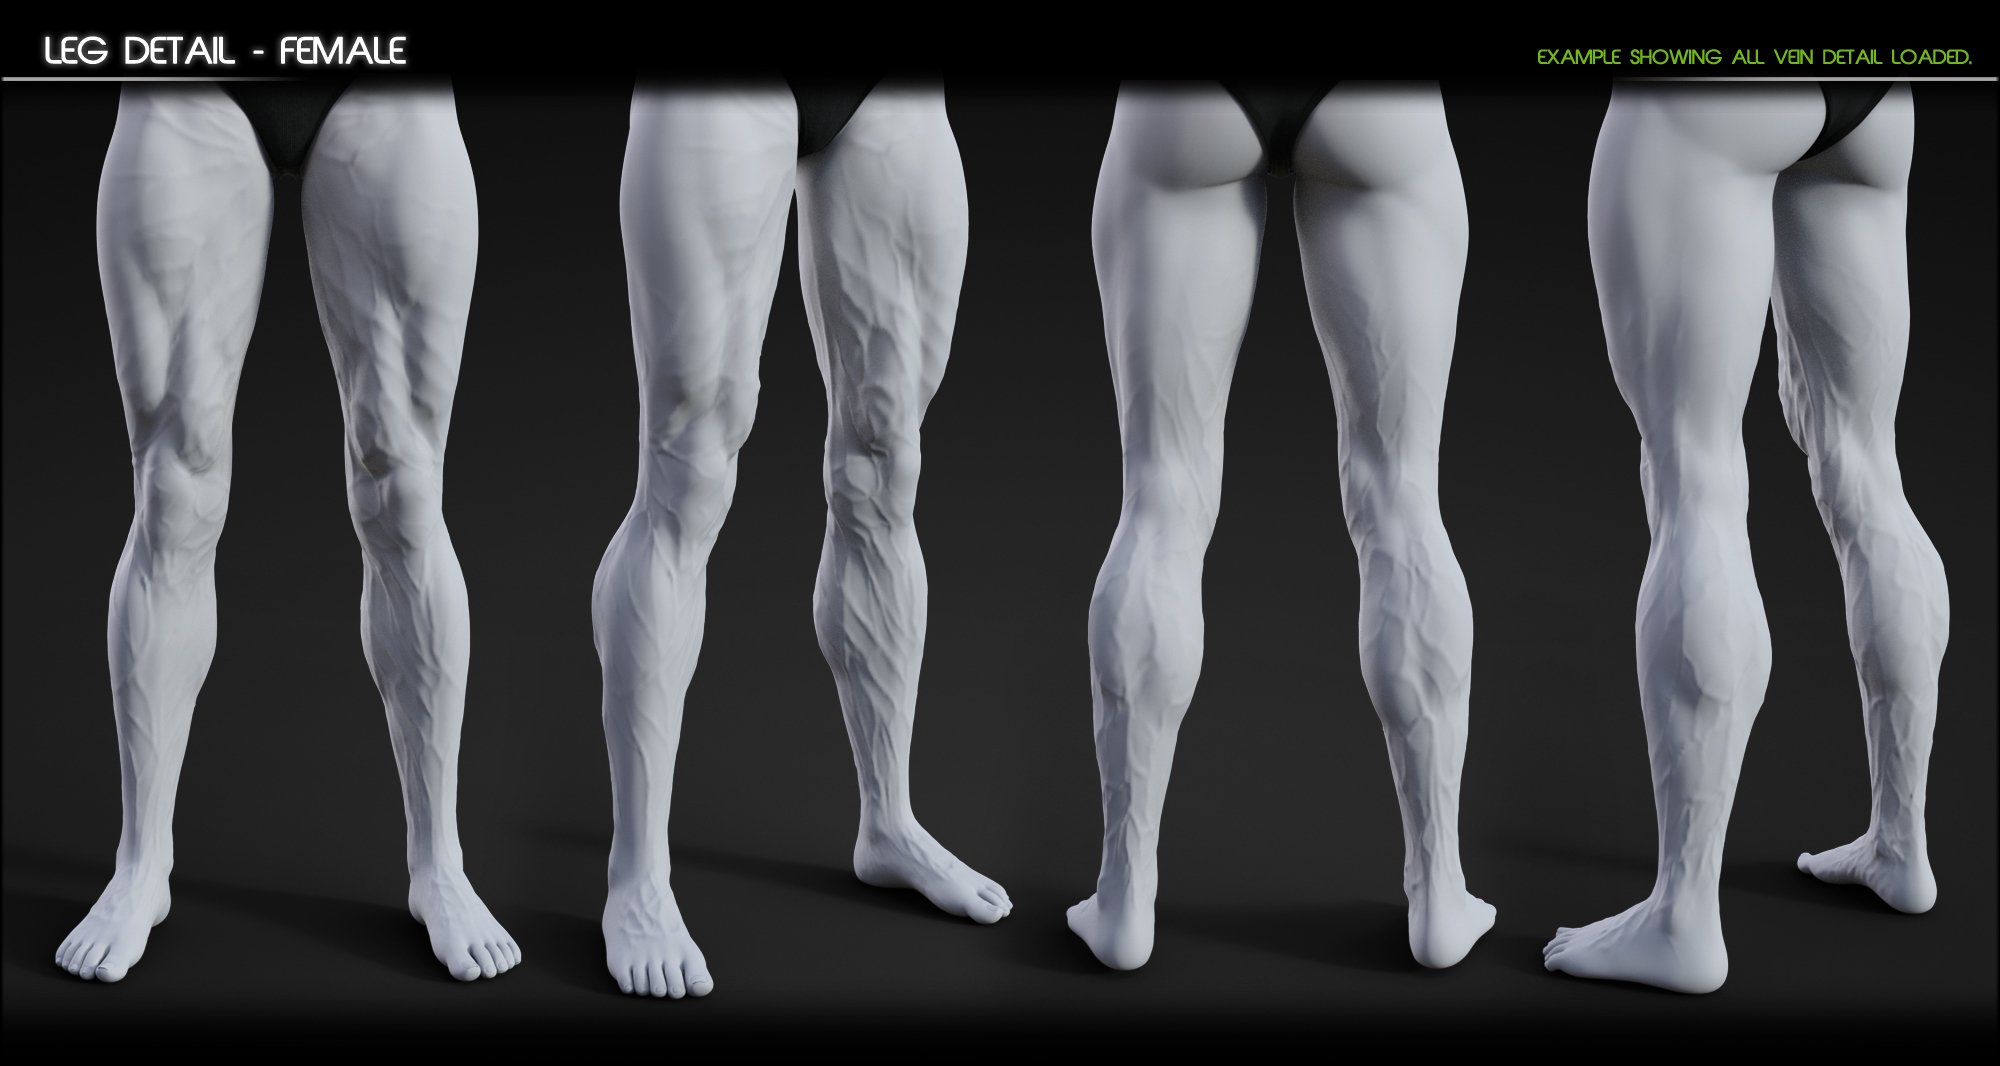 Vascularity HD for Genesis 8 Female and Male by: Zev0, 3D Models by Daz 3D